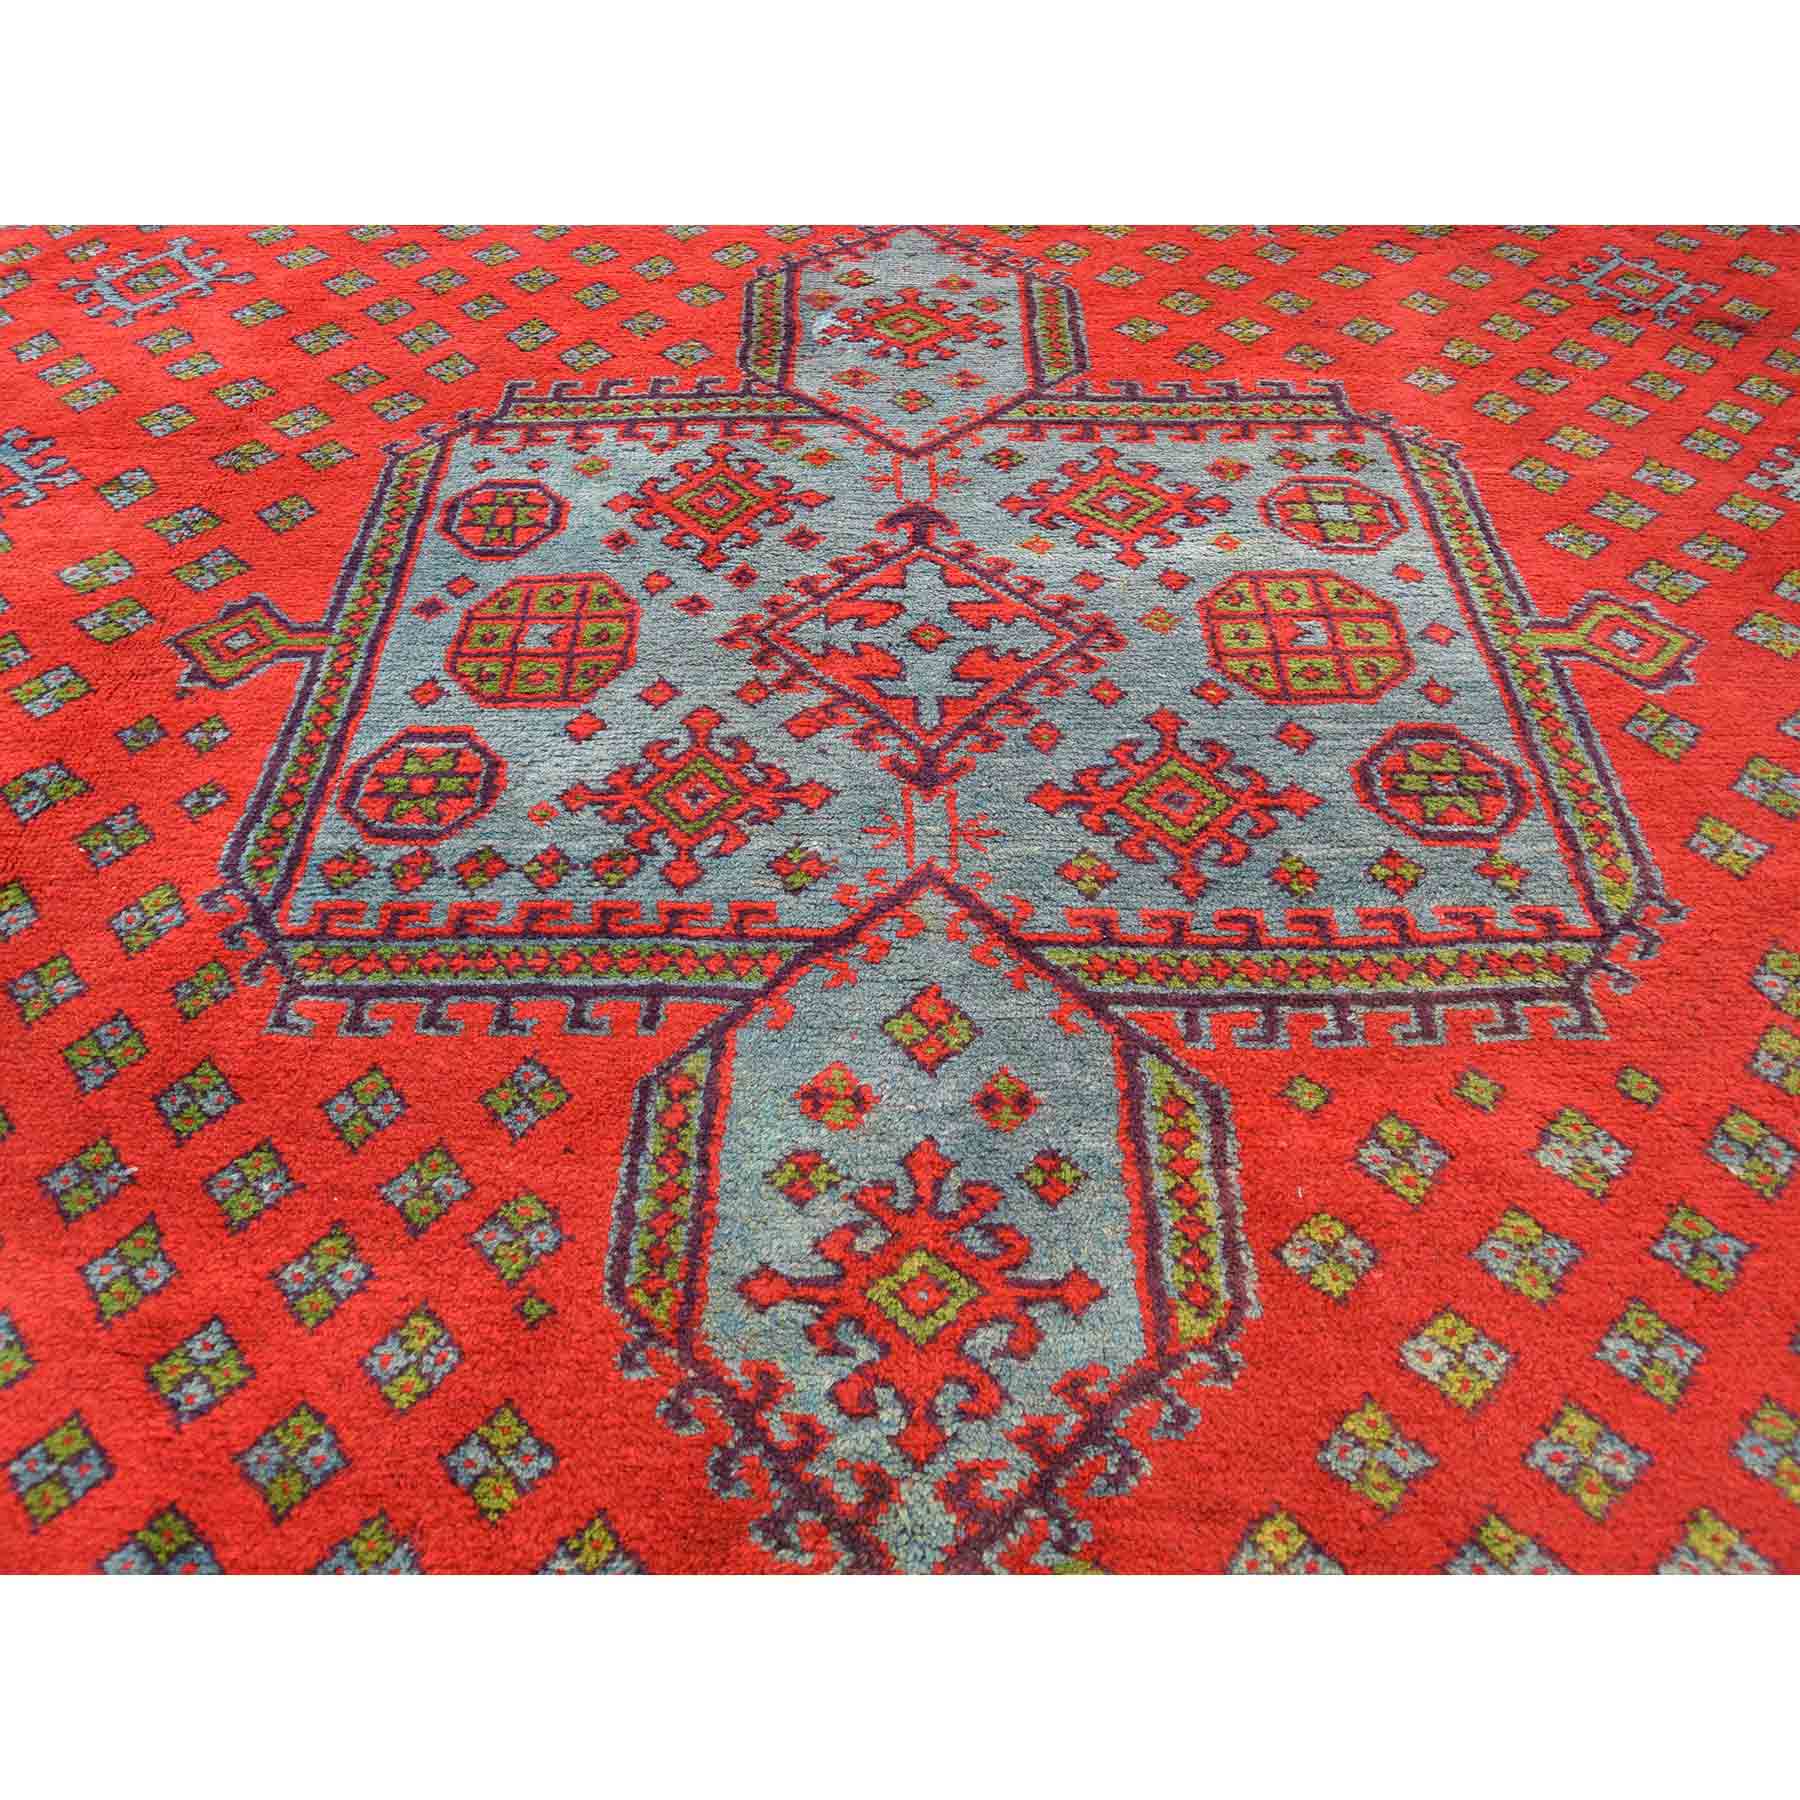 Antique-Hand-Knotted-Rug-198825